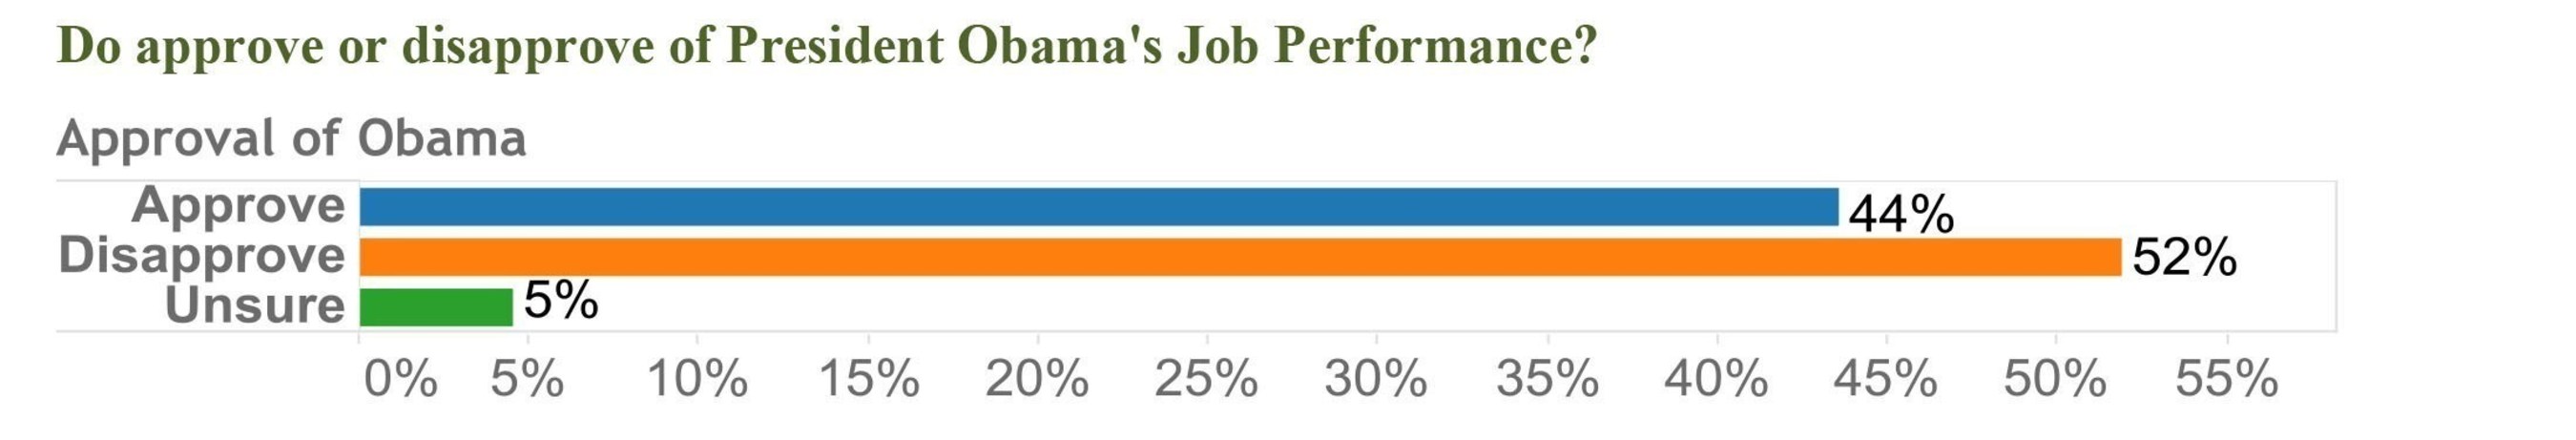 Do approve or disapprove of President Obama's Job Performance